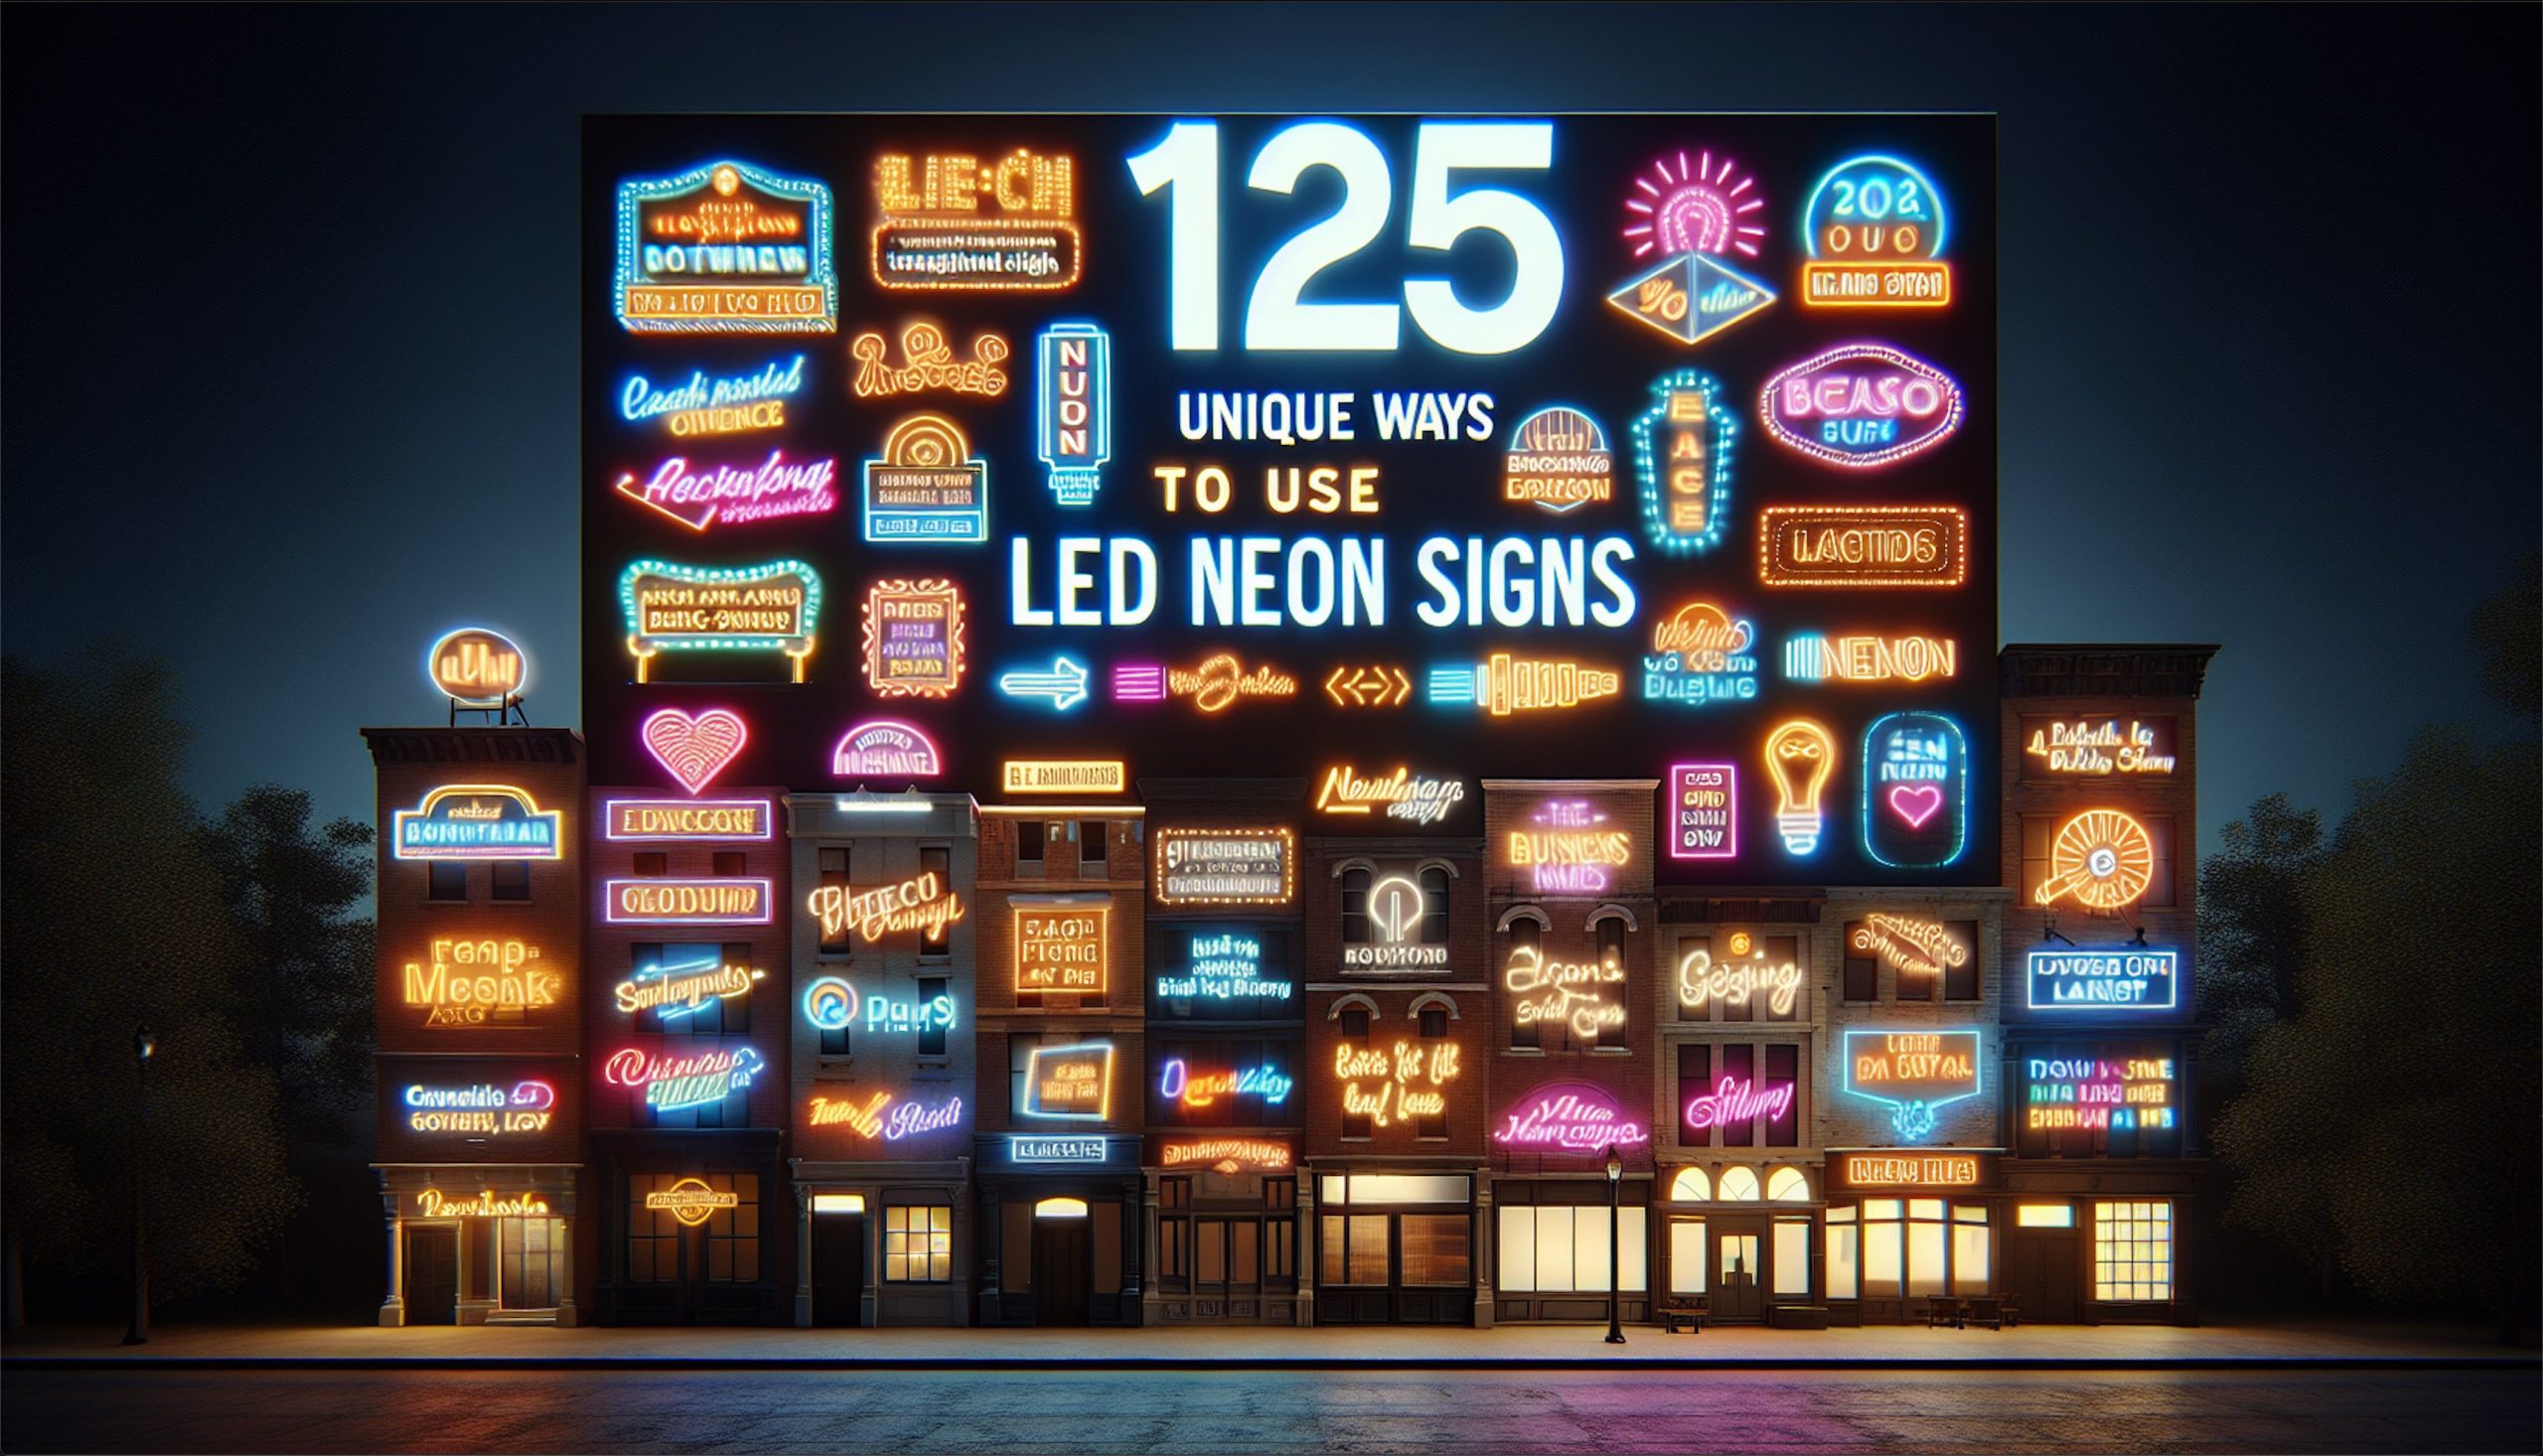 125-unique-ways-to-use-LED-neon-signs-scaled-1